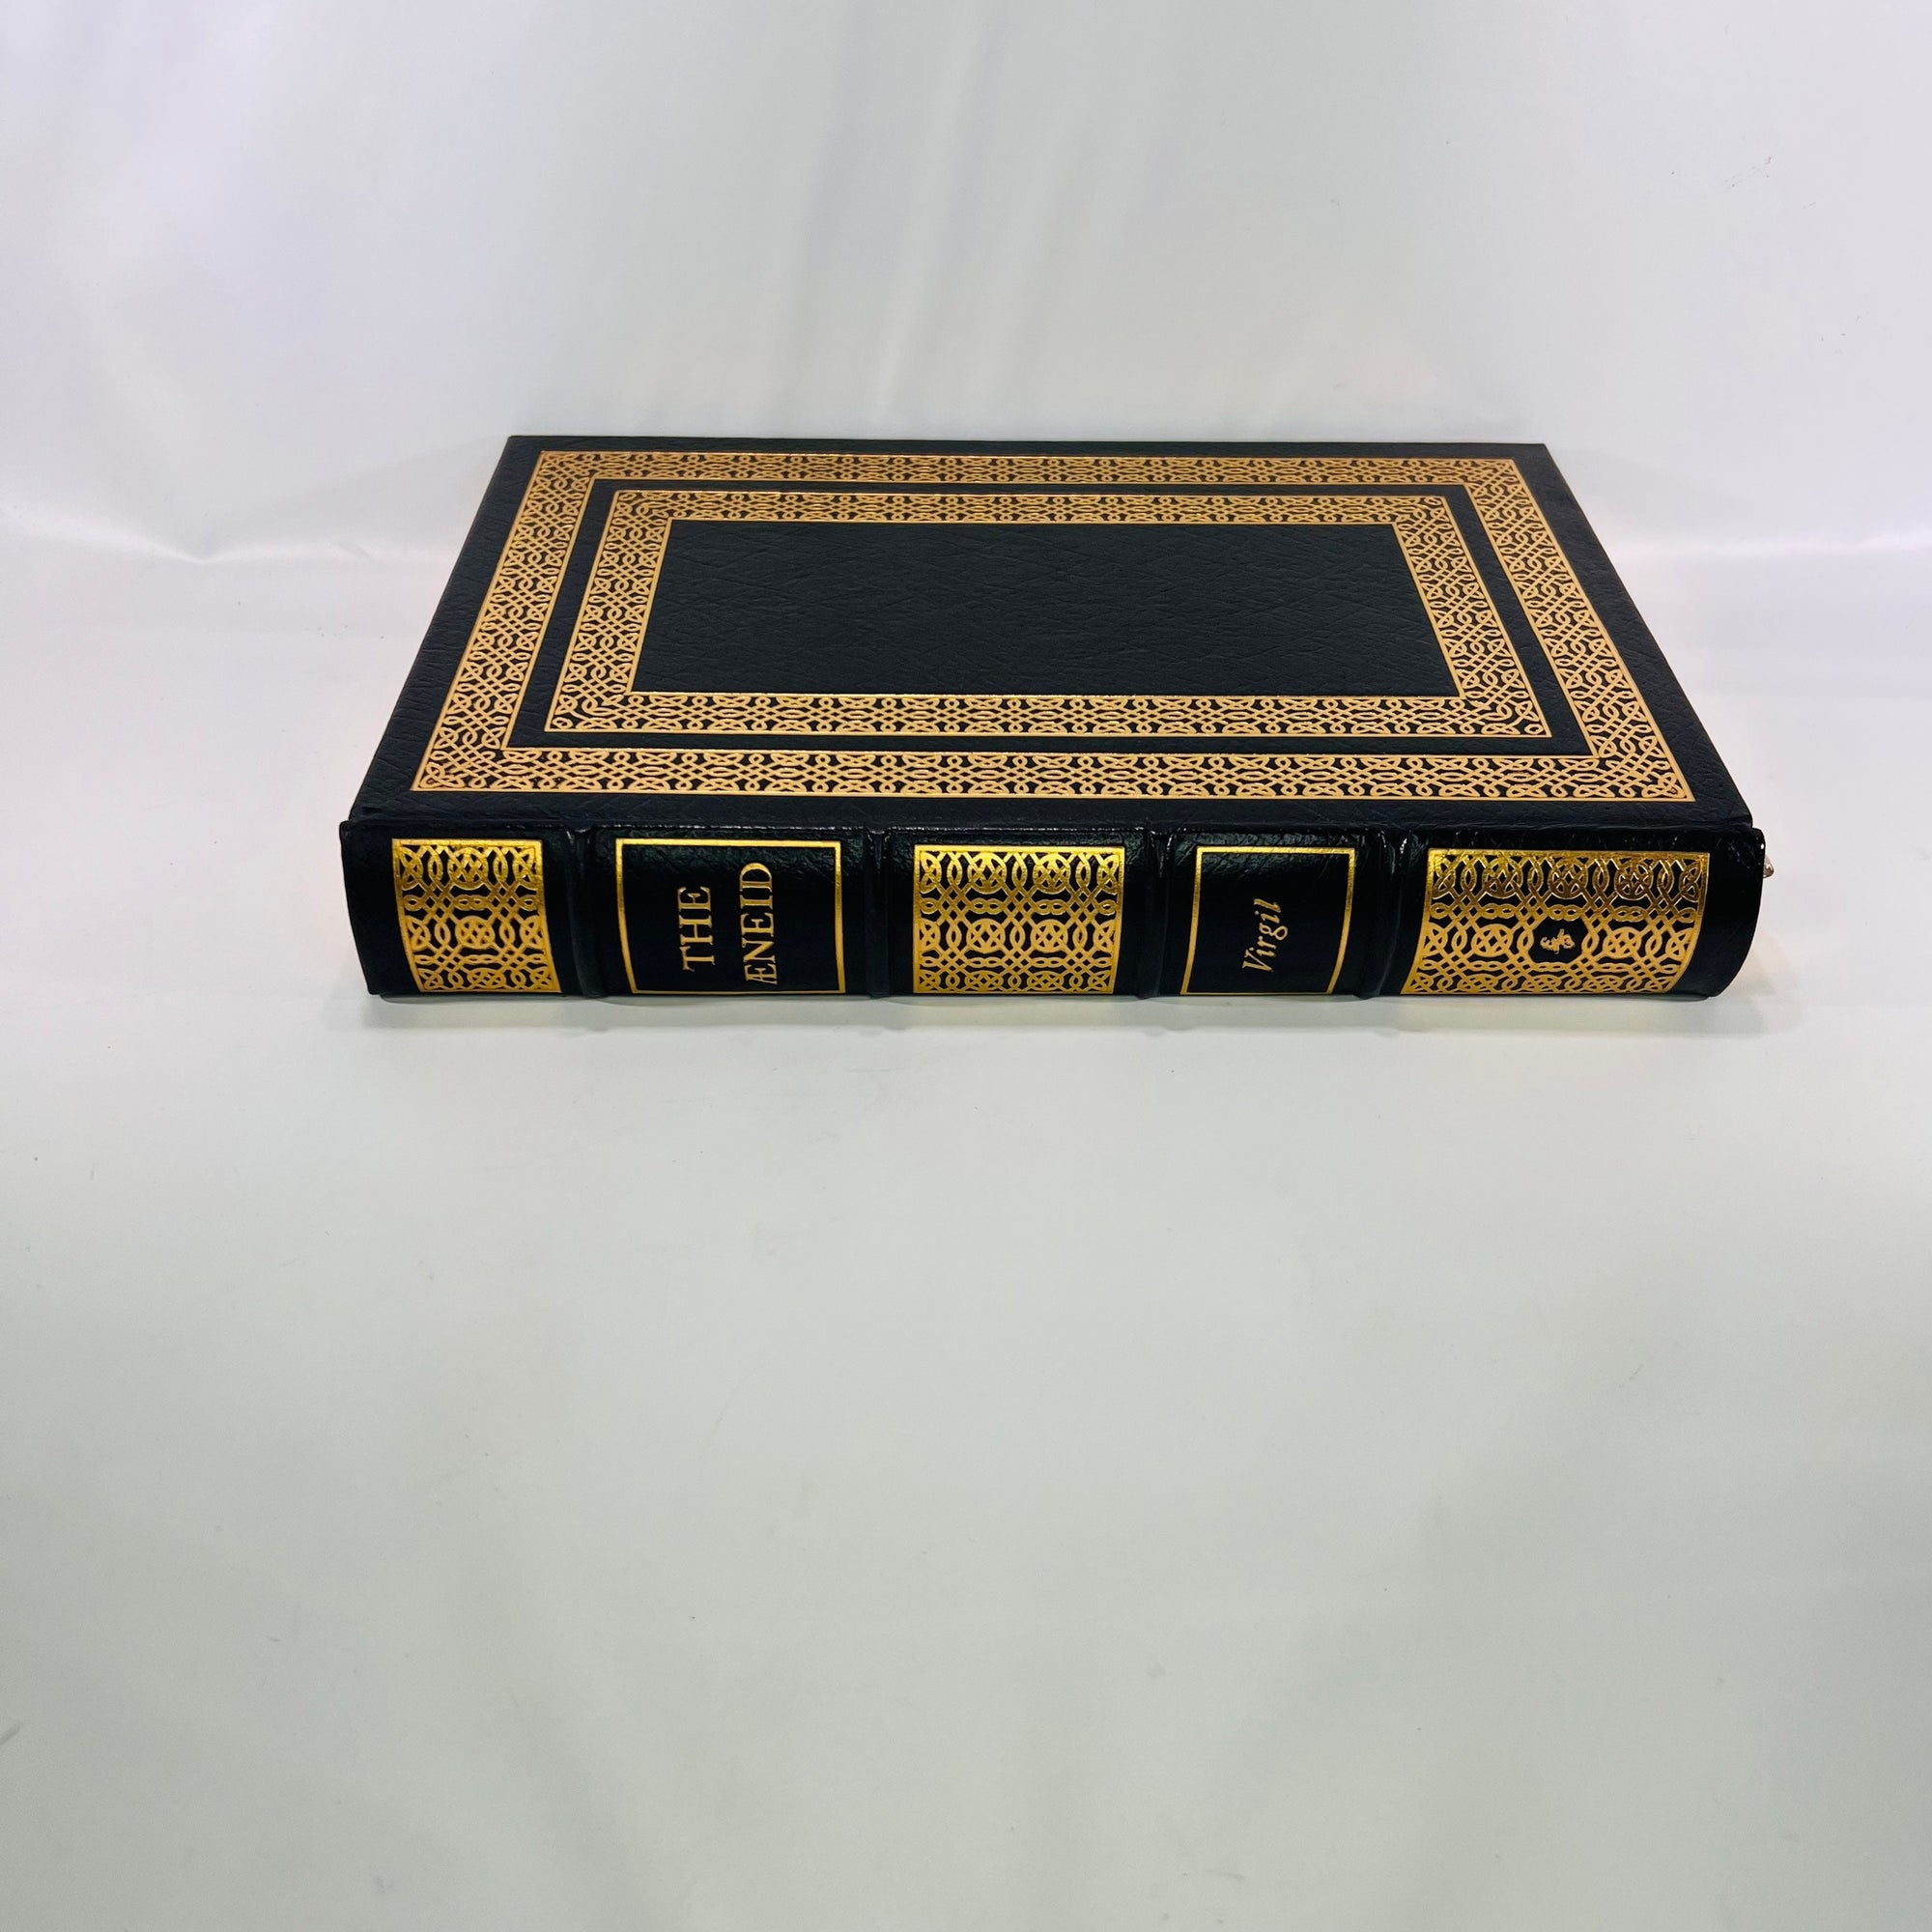 The Aeneid by Virgil translator John Dryden 1979 Vintage Classic Easton Press Collectable Leather Bound Epic Adventure Book Gold Gilt Pages